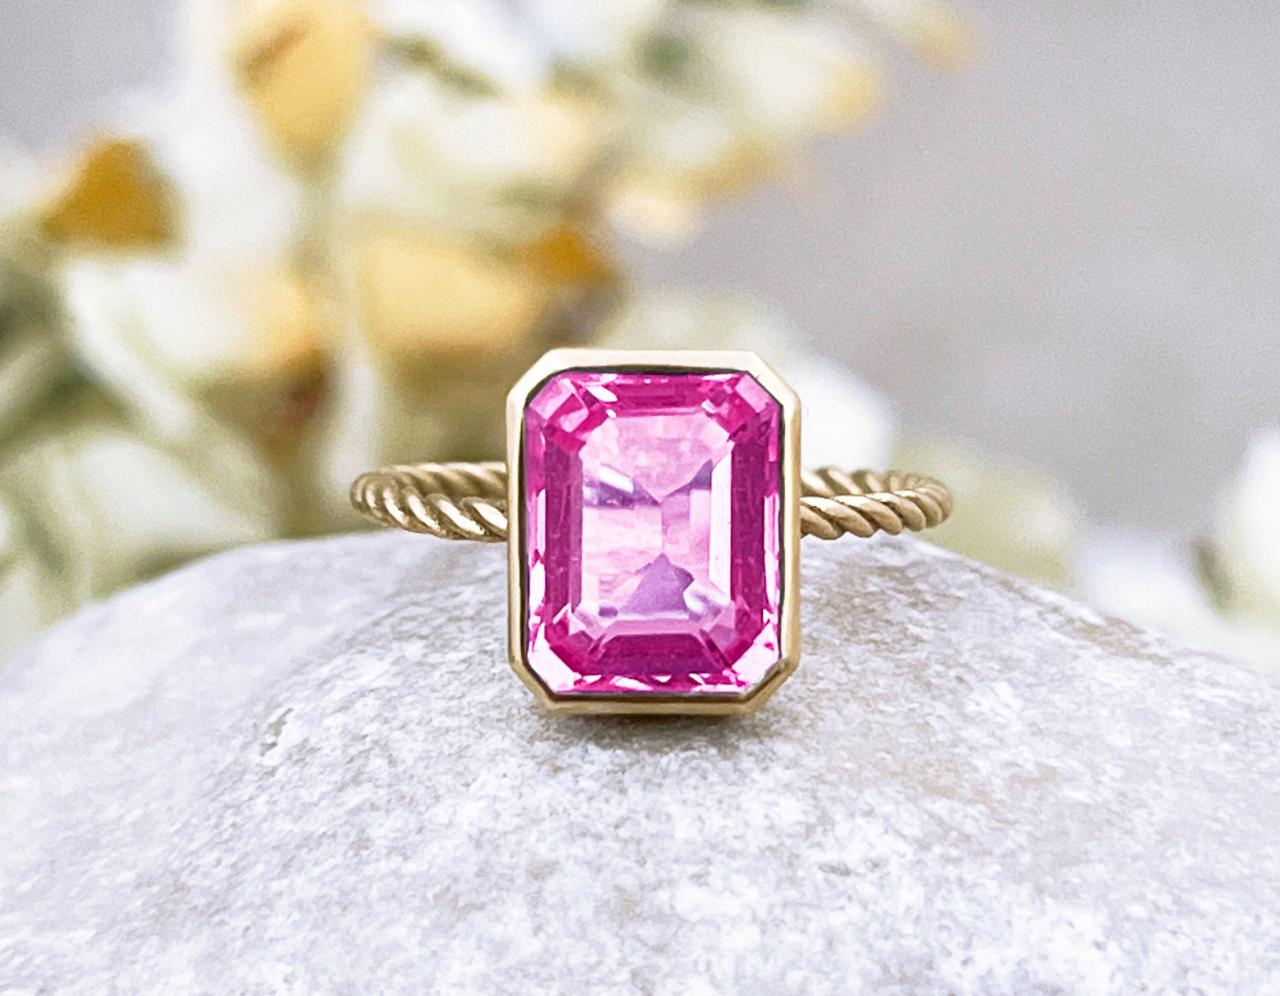 Solid gold engagement ring with emerald cut Pink topaz, natural rose stone promise ring, 18k modern solitaire twist ring